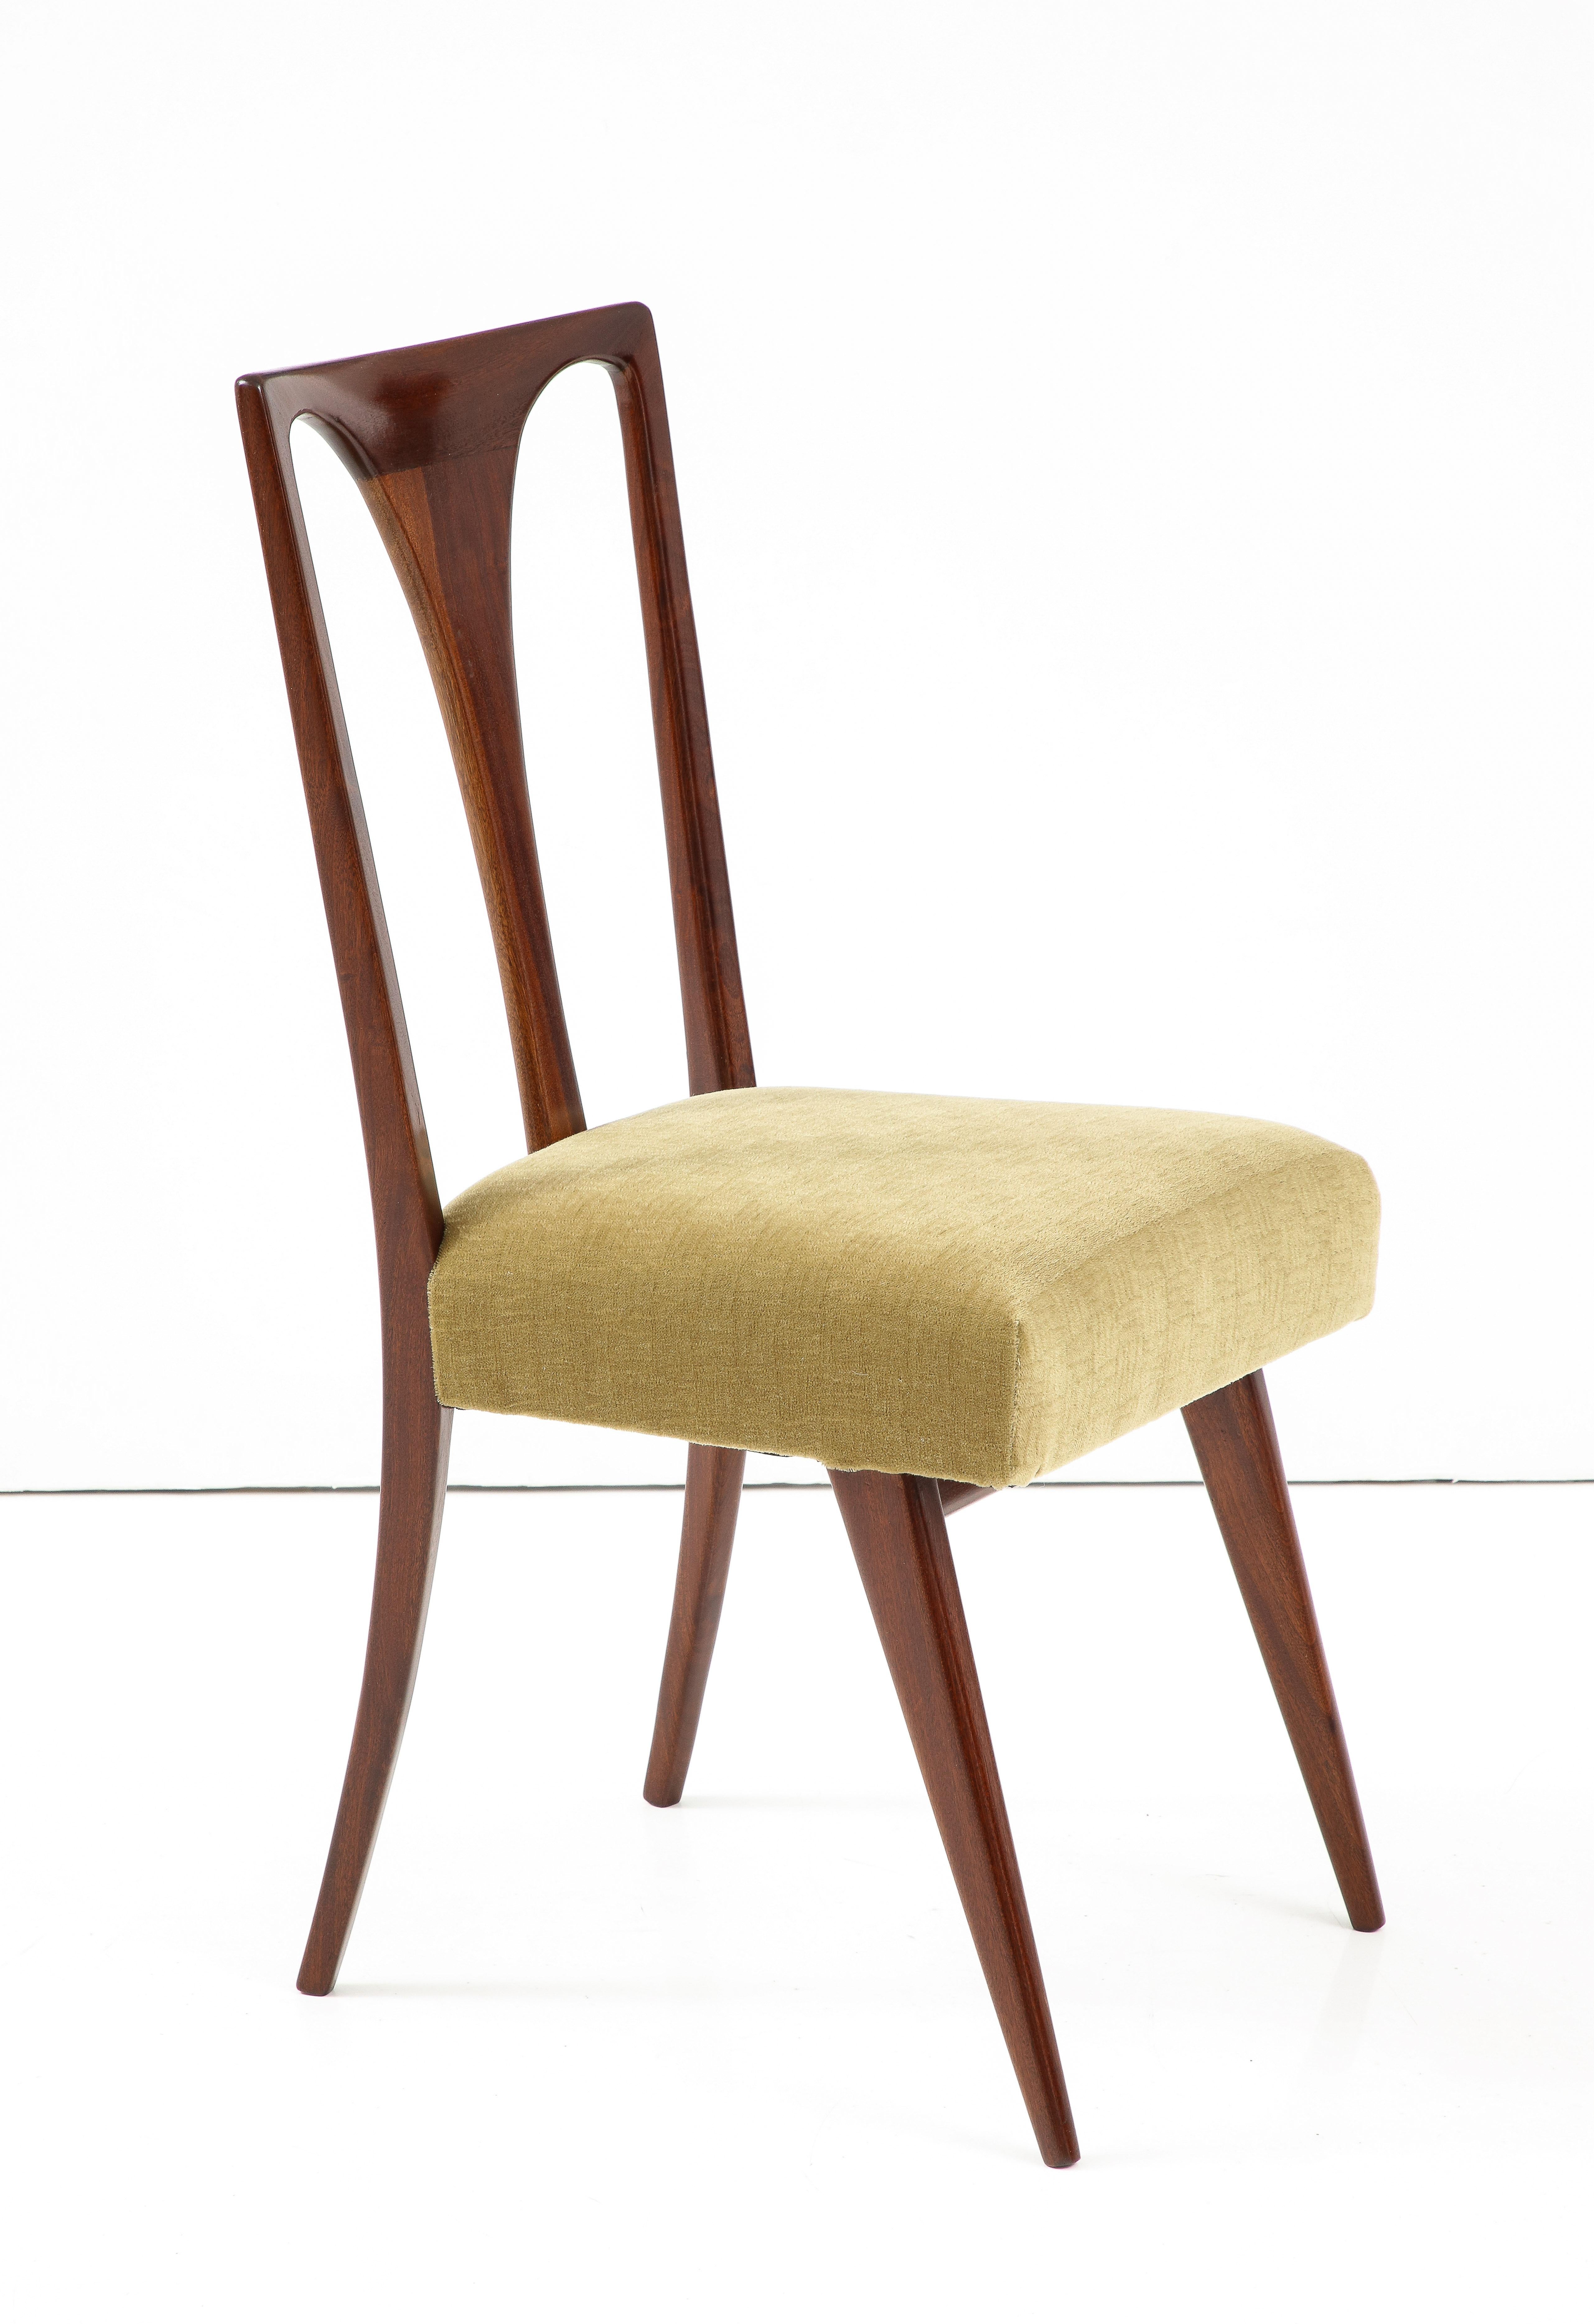 1960's Mid-Century Modern Italian Dining Chairs In The Style Of Carlo De Carli 8